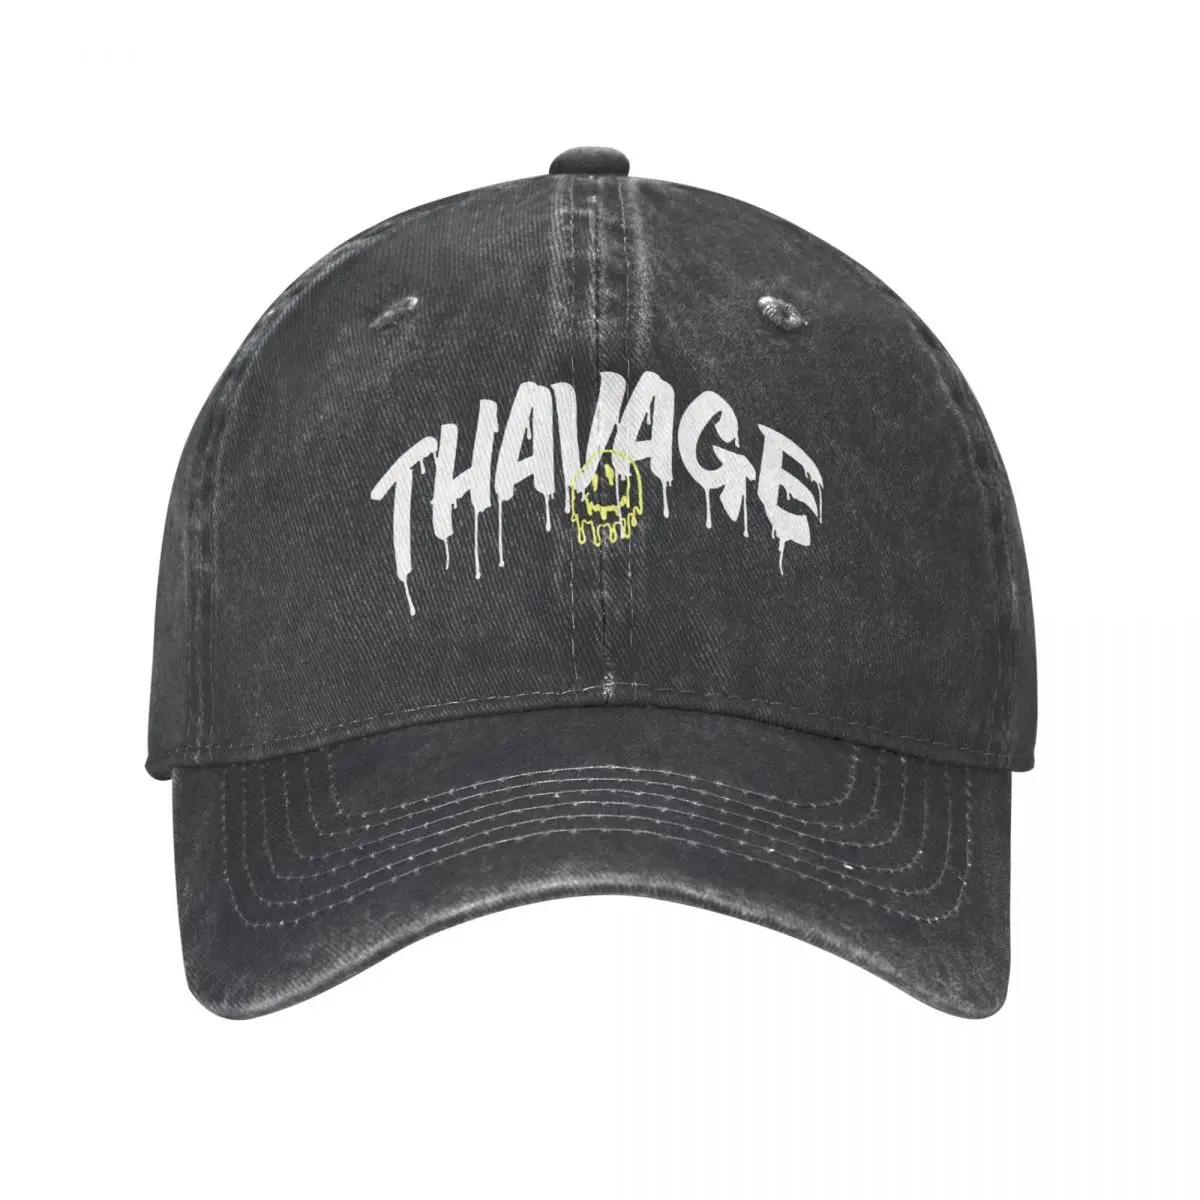 

Fitness Thavage Baseball Caps Vintage Distressed Denim Washed Snapback Cap Unisex All Seasons Travel Unstructured Soft Hats